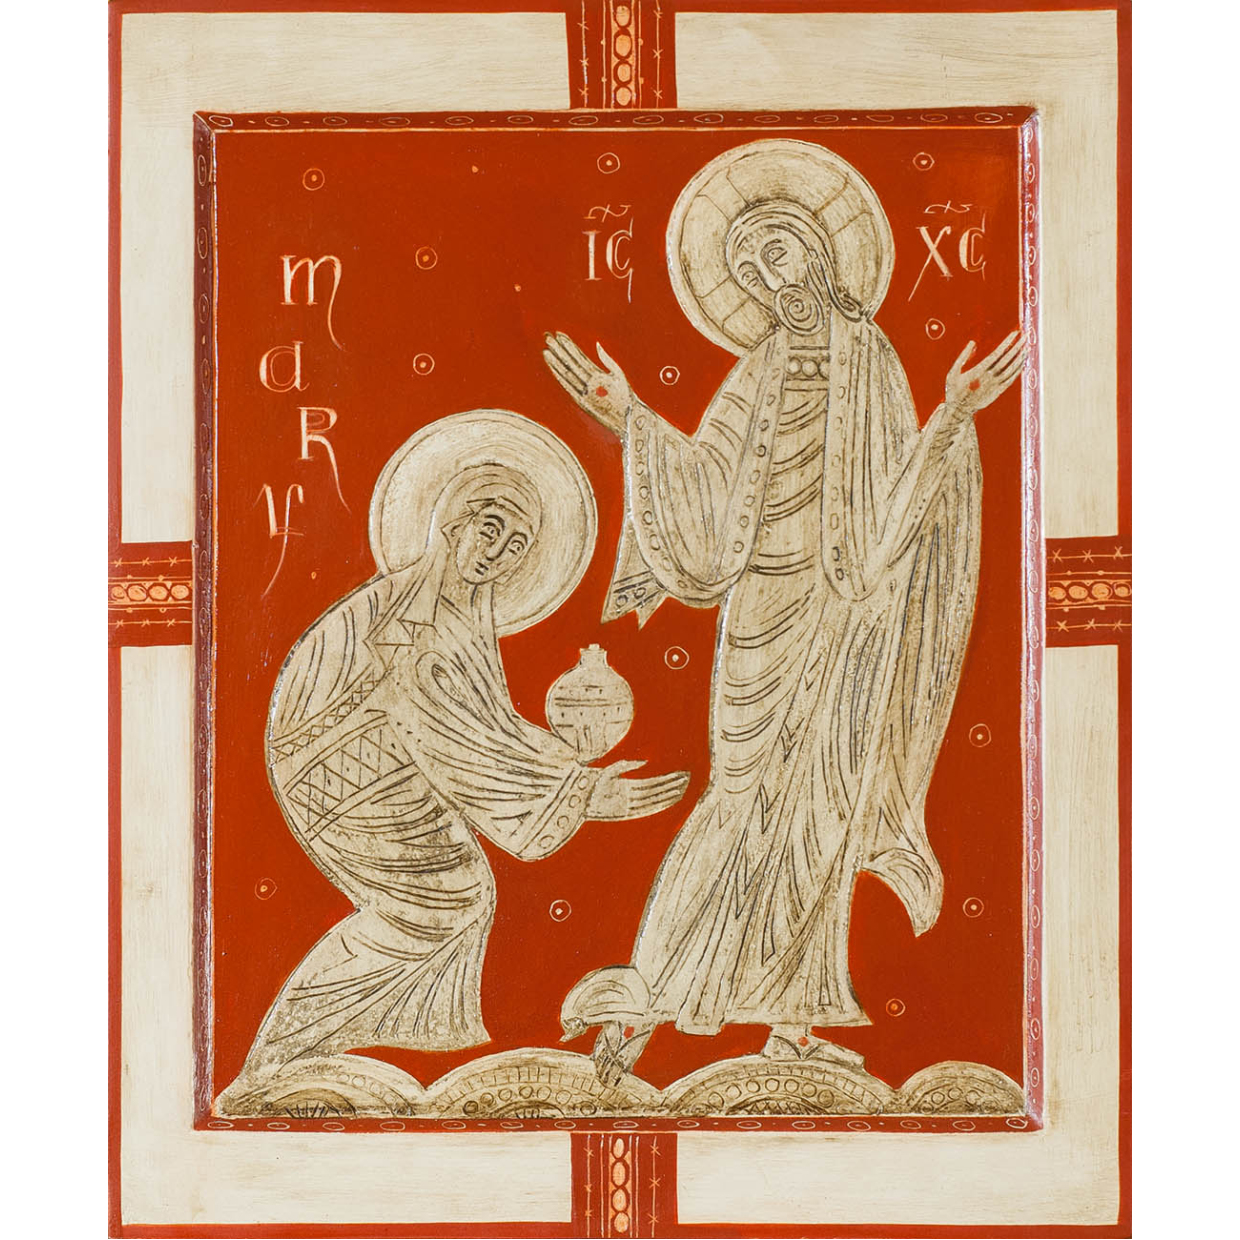 Christ Appearing to Mary Magdalene (Noli Me Tangere)